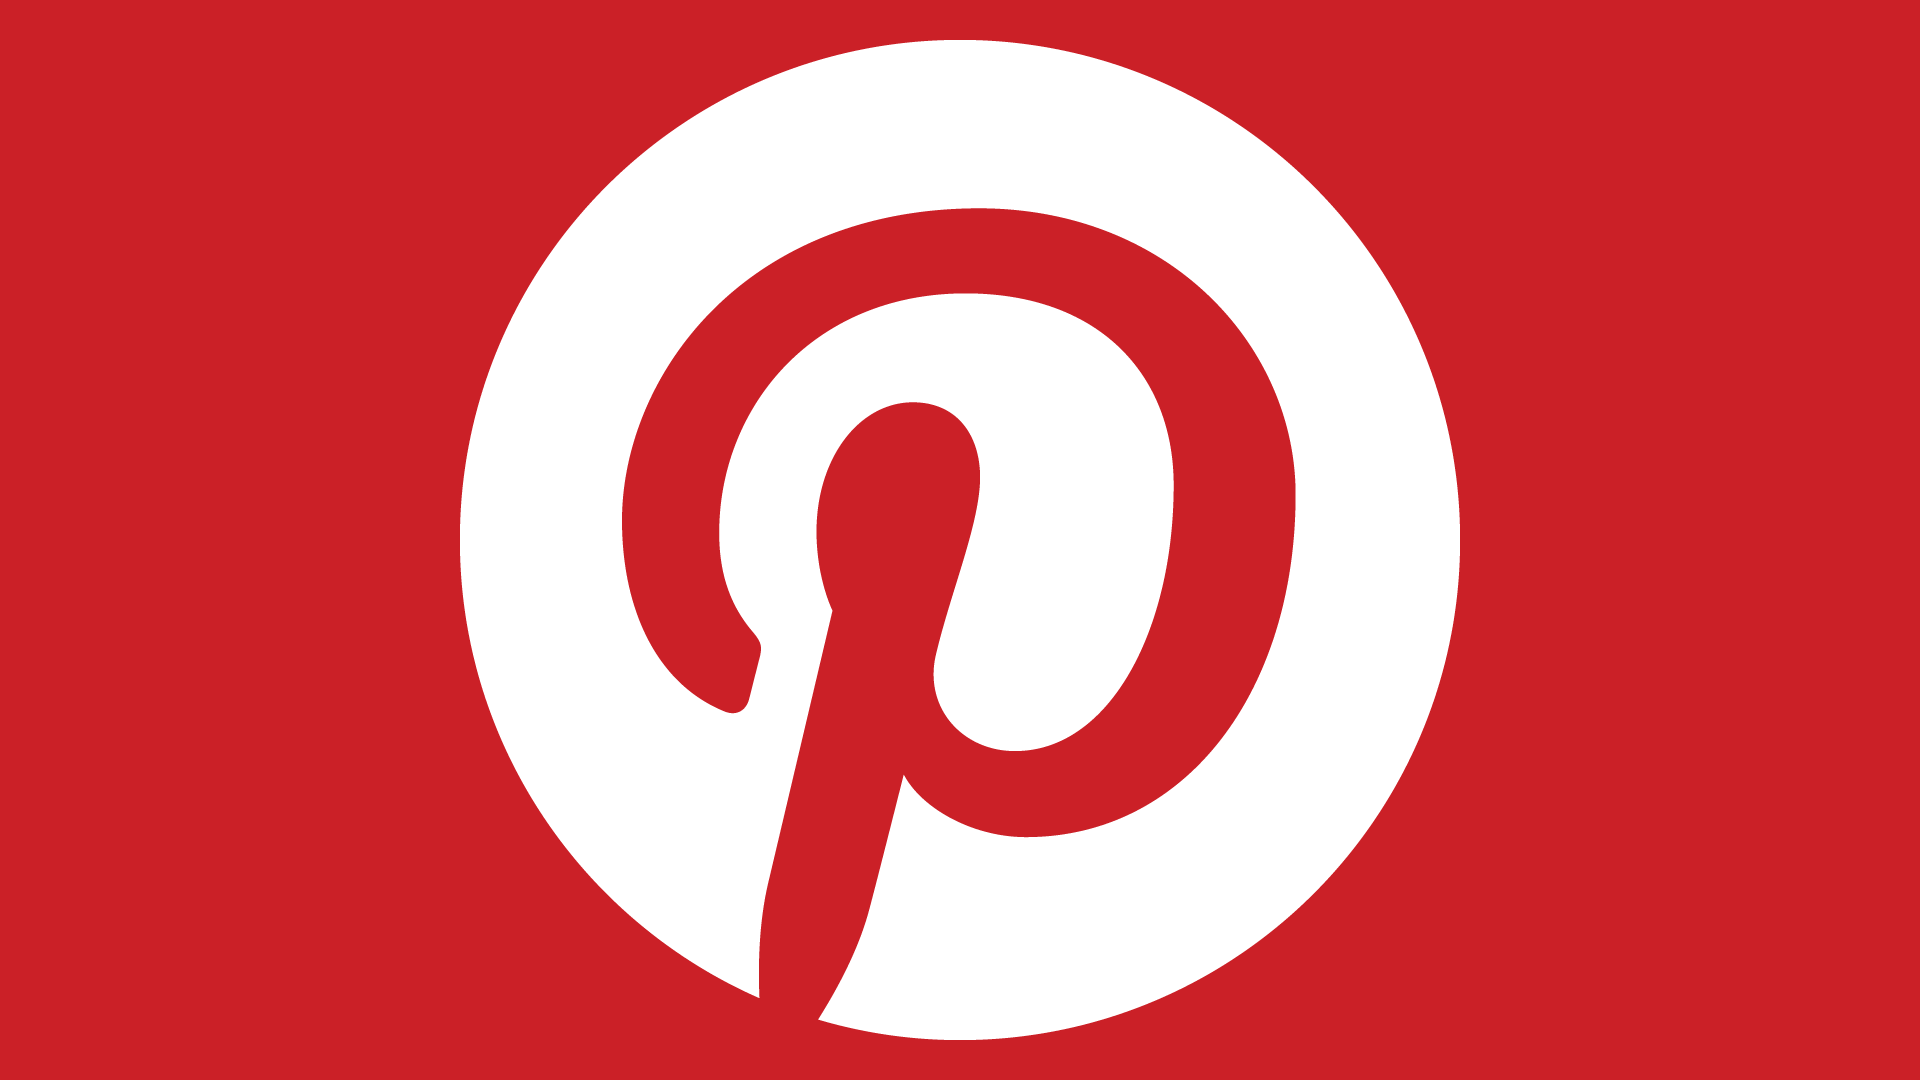 Pinterest turning into an online shopping mall? Everything points to it!